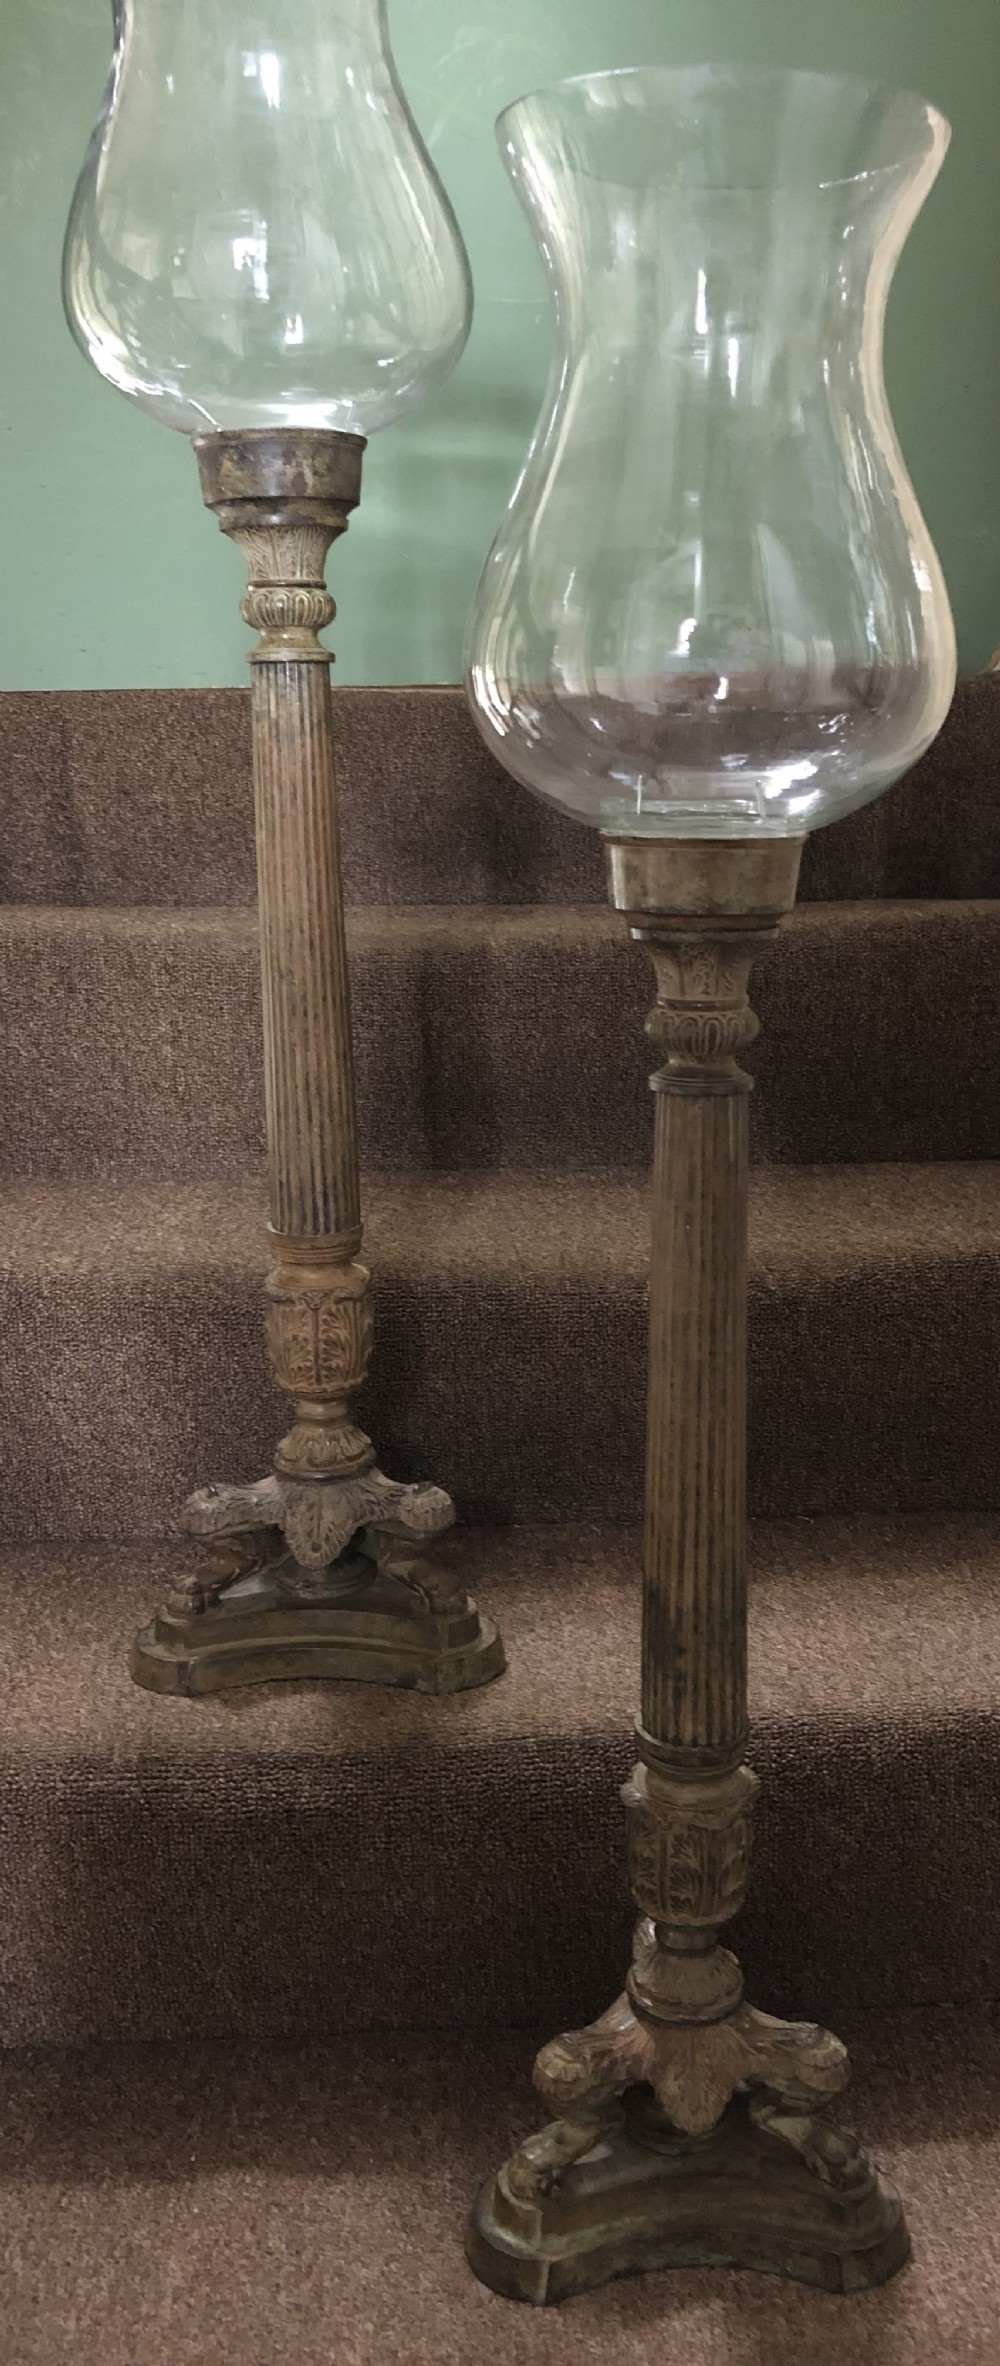 pair of large late c19th french empirestyle patinated castiron candlesticks with glass hurricane or storm shades